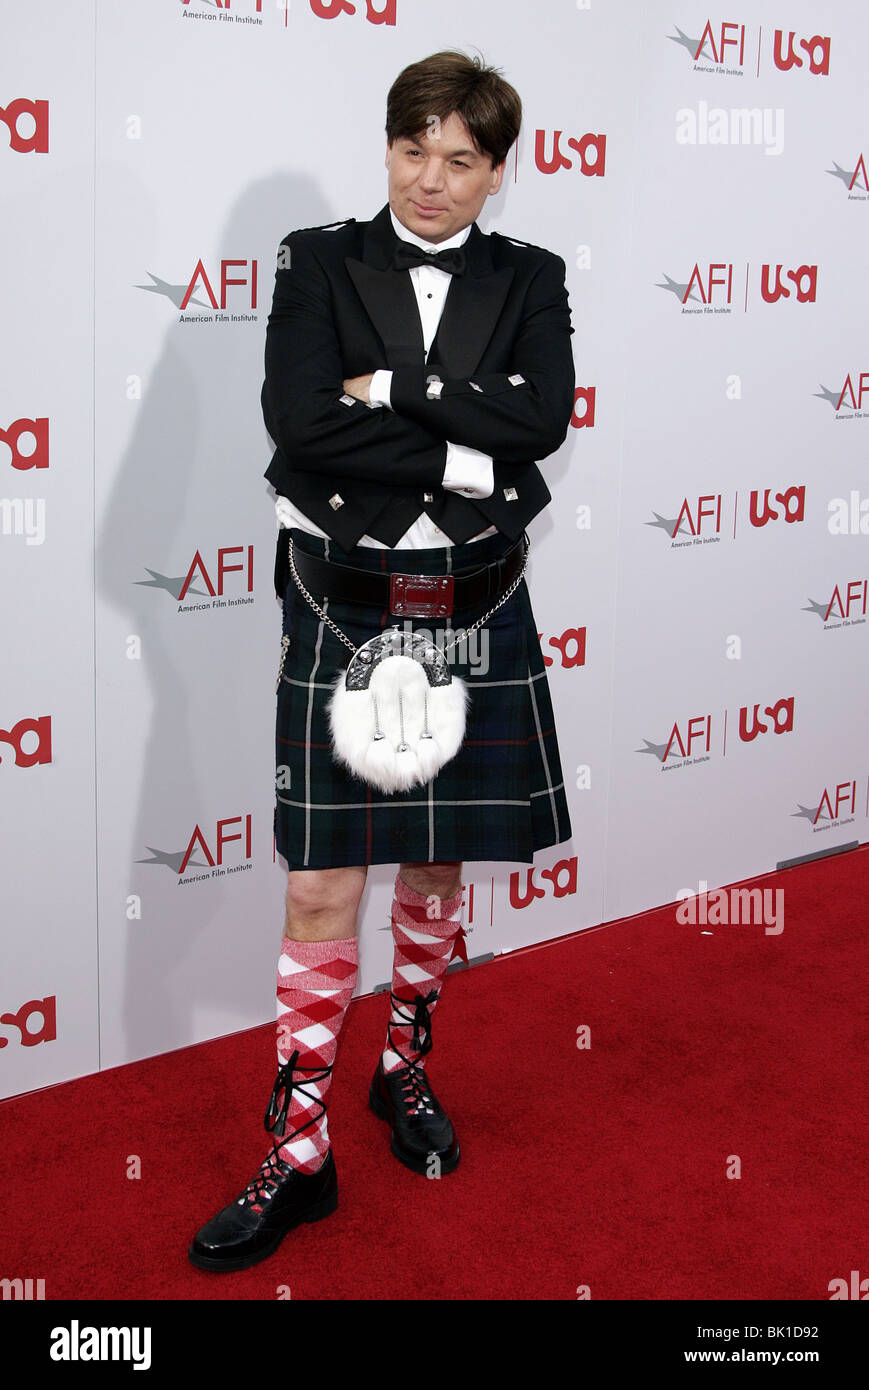 MIKE MYERS 34TH ANNUAL AFI ACHIEVEMENT AWARD A TRIBUTE TO SEAN CONNERY KODAK THEATRE HOLLYWOOD LOS ANGELES USA 08 May 2006 Stock Photo